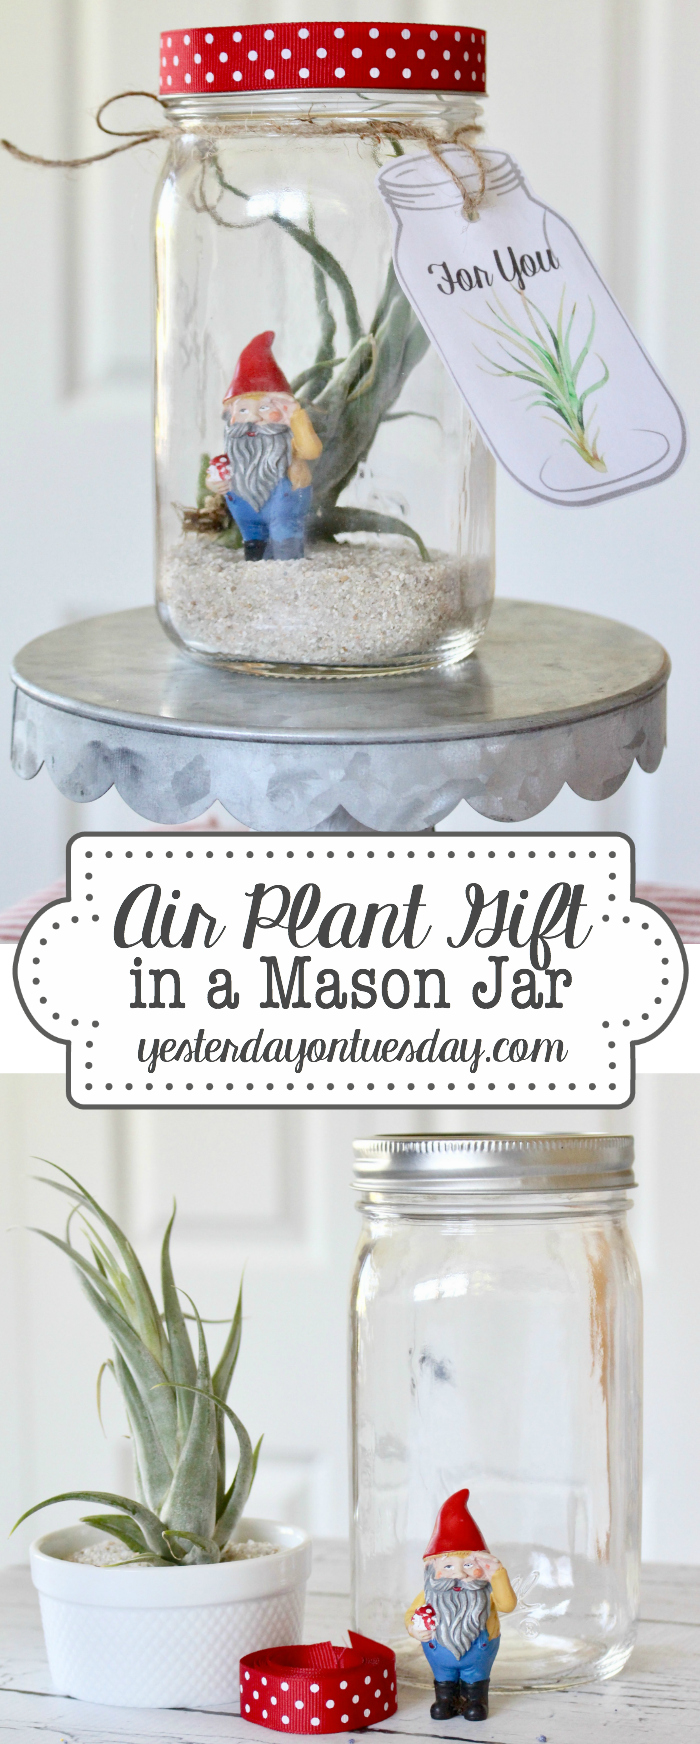 Air Plant Gift in a Mason Jar with printable tags for for any occasion including gift giving, Get Well Soon, Thinking of You, Thank You and more!